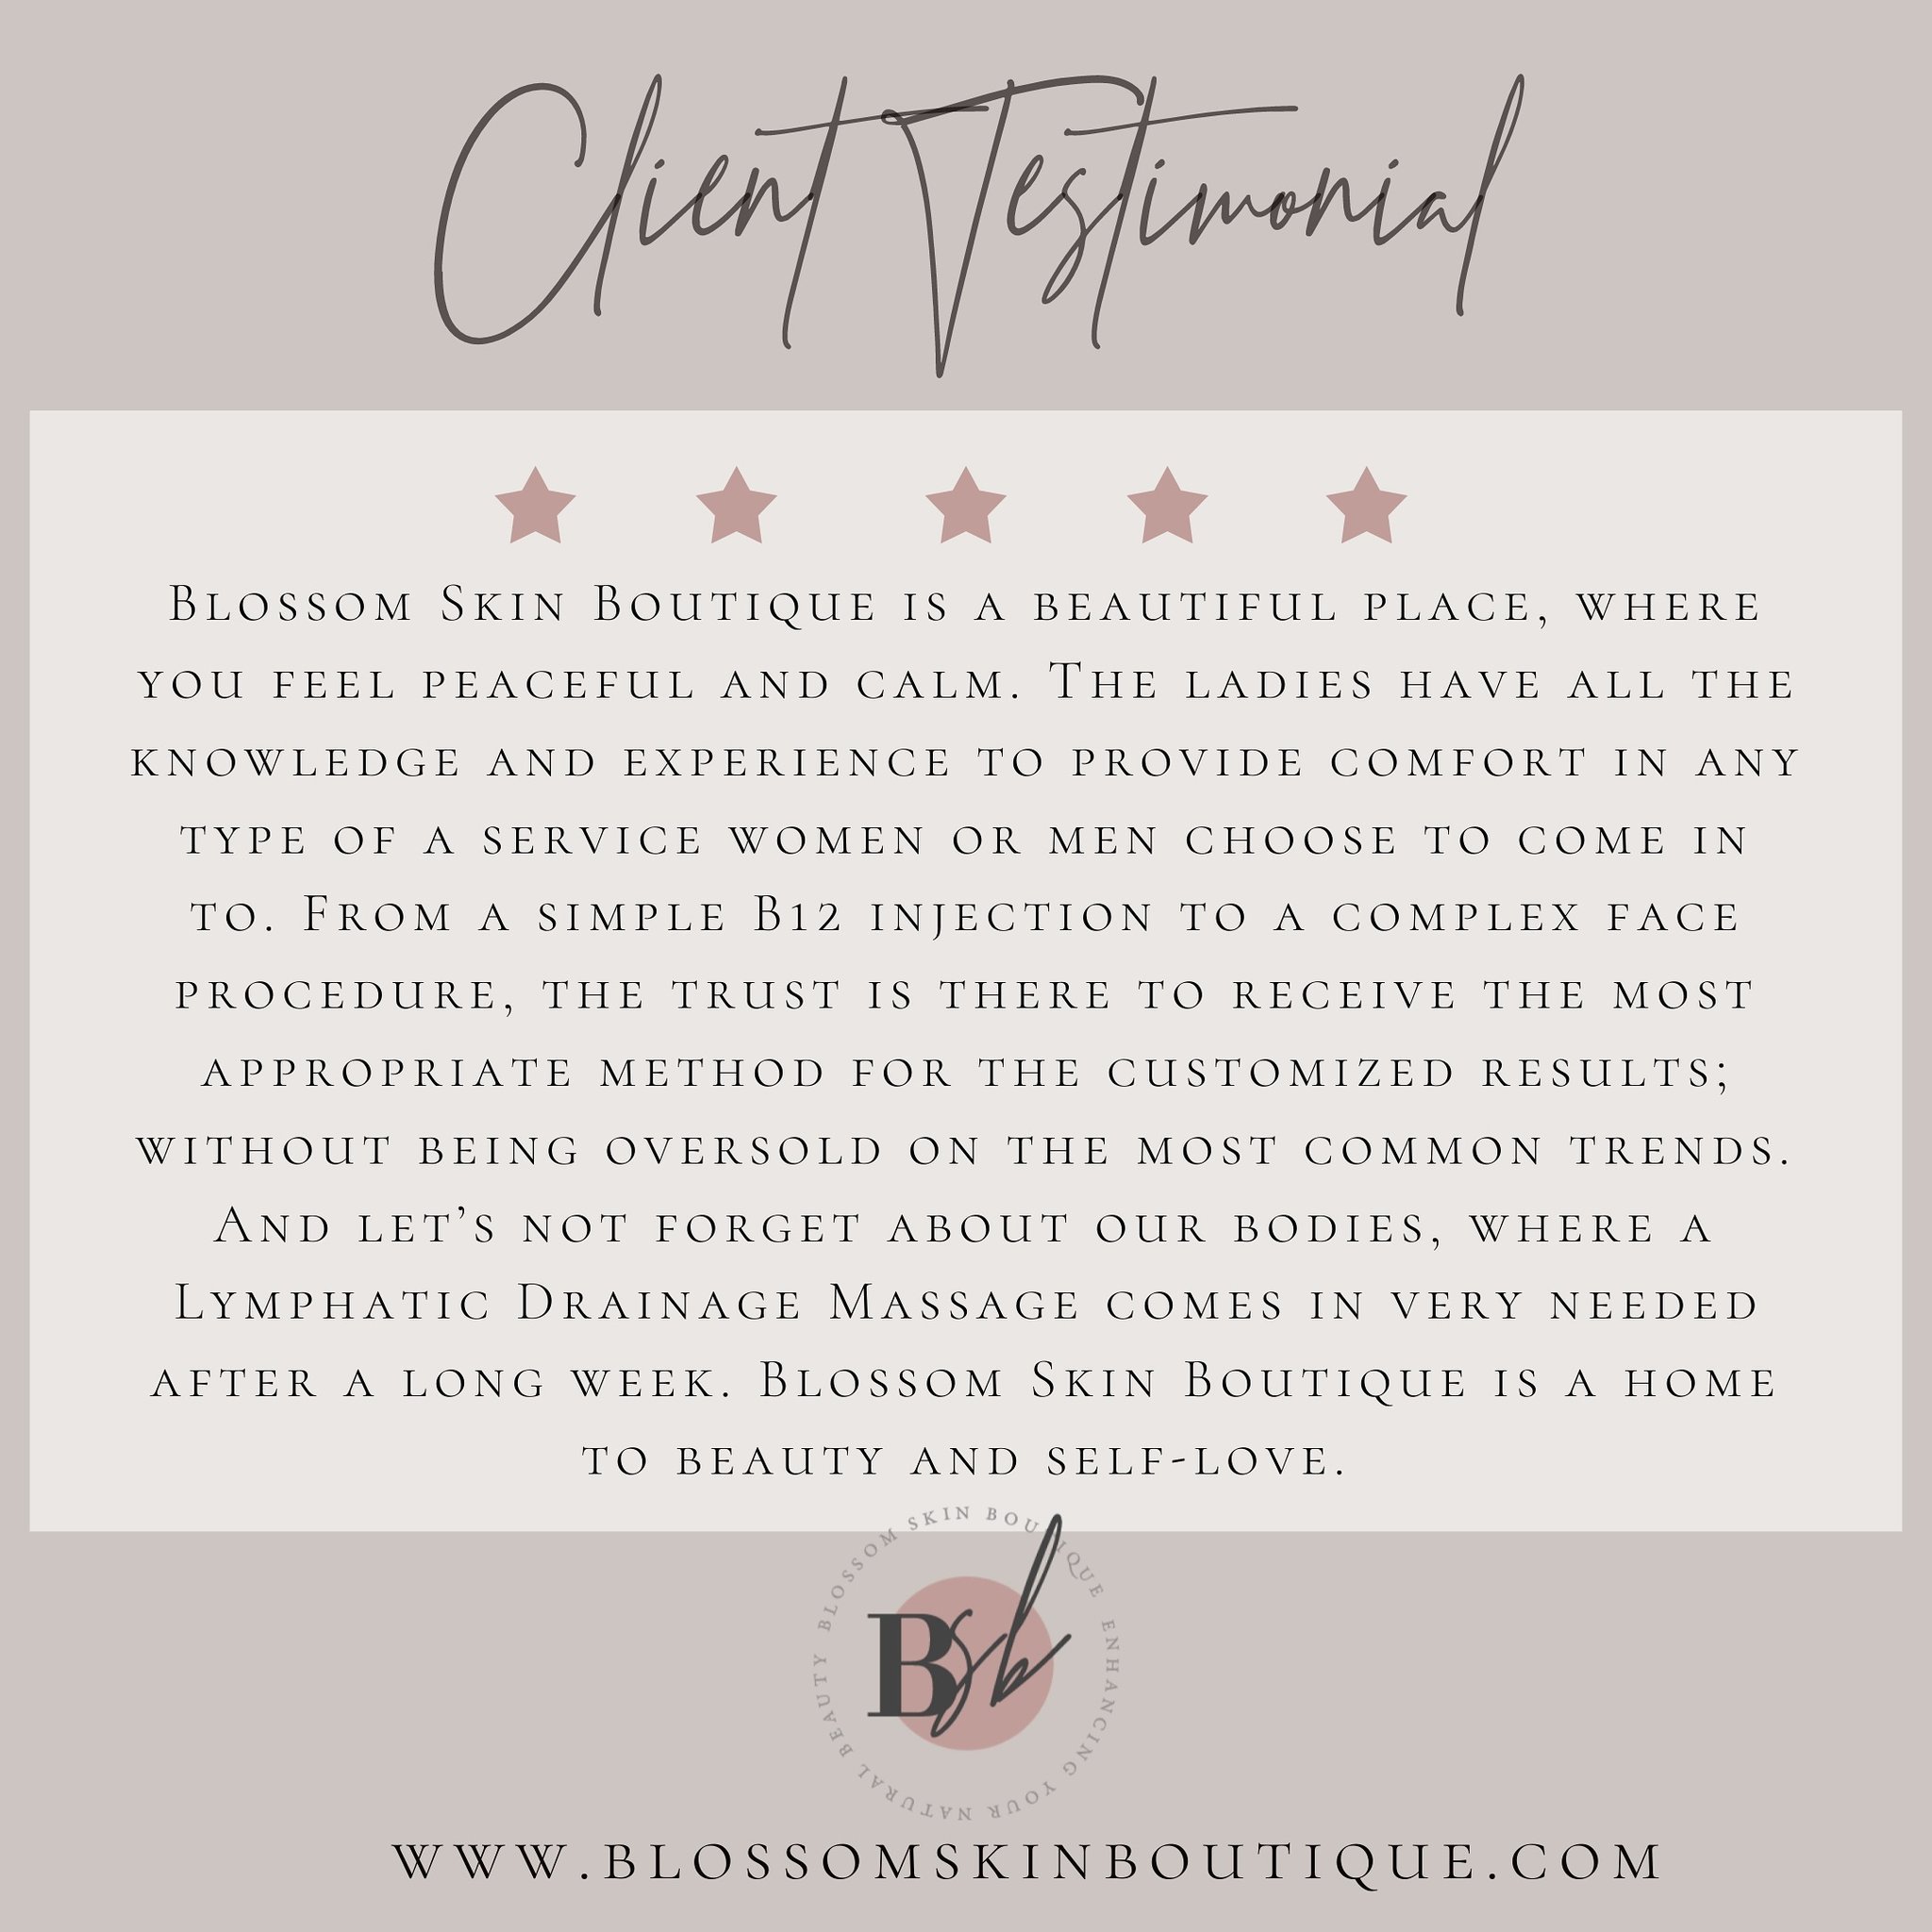 💚A huge thank you to everyone who shared their experience at our clinic on Google🌱

Your reviews are the best compliments we could ask for! 
⭐️⭐️⭐️⭐️⭐️

#BlossomReviews #feedback #grateful #thankyou #clientslove #clientappreciation #testimonial #bo